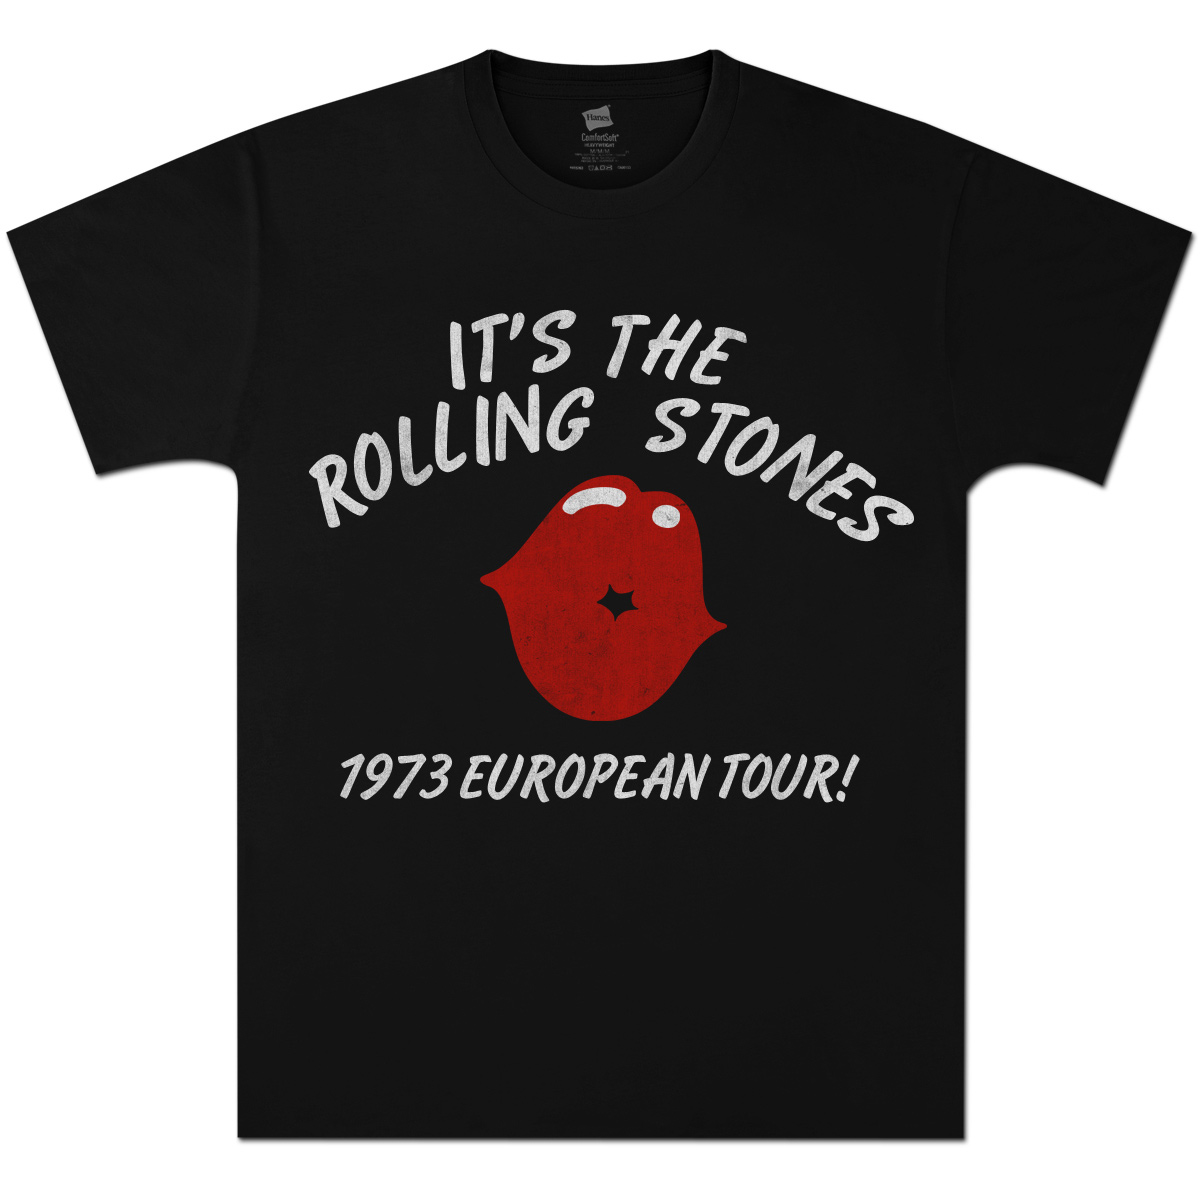 ROLLING STONES / ローリング・ストーンズ / IT'S THE ROLLING STONES '73 T-SHIRT (M)